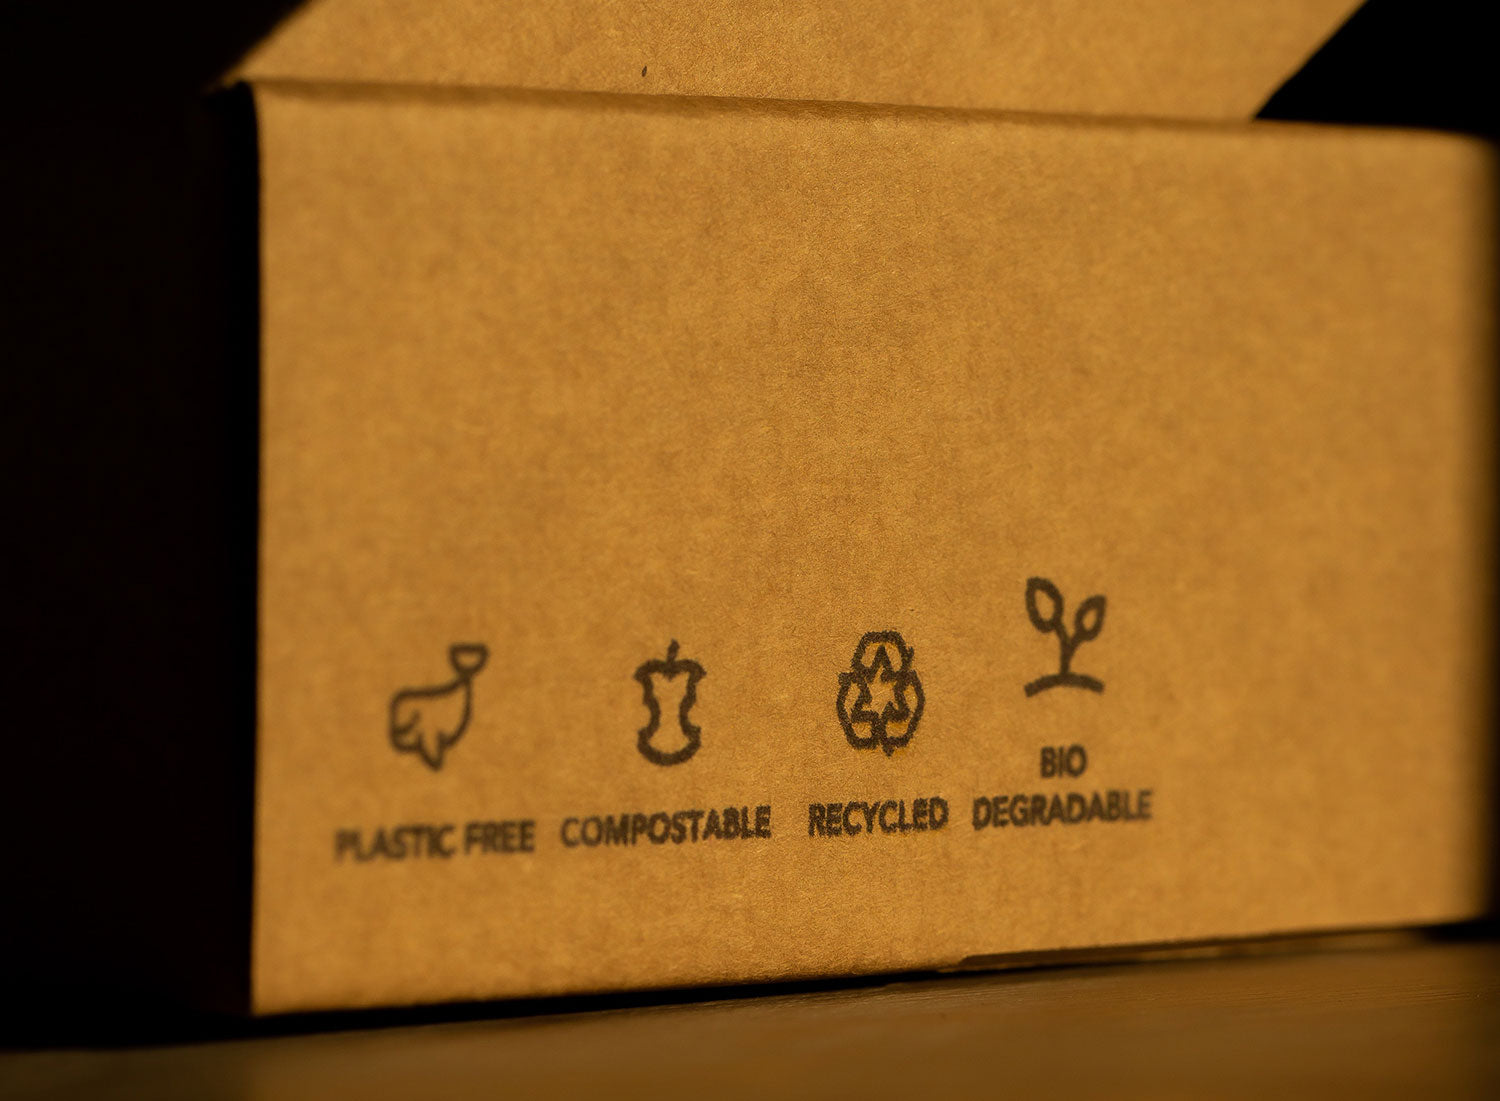 Recycled and Compostable Cardboard